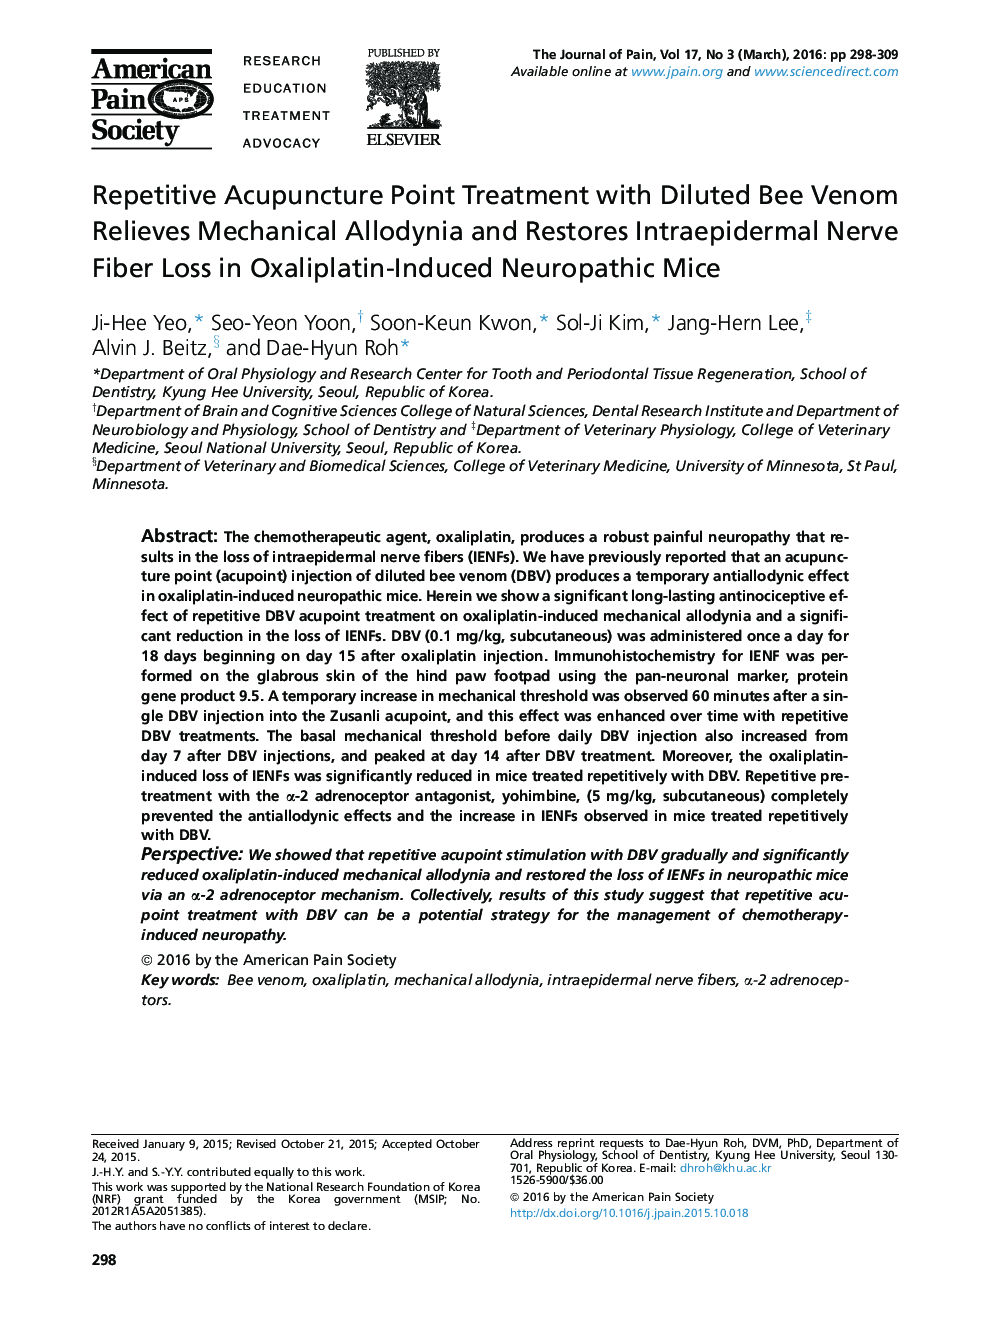 Repetitive Acupuncture Point Treatment with Diluted Bee Venom Relieves Mechanical Allodynia and Restores Intraepidermal Nerve Fiber Loss in Oxaliplatin-Induced Neuropathic Mice 